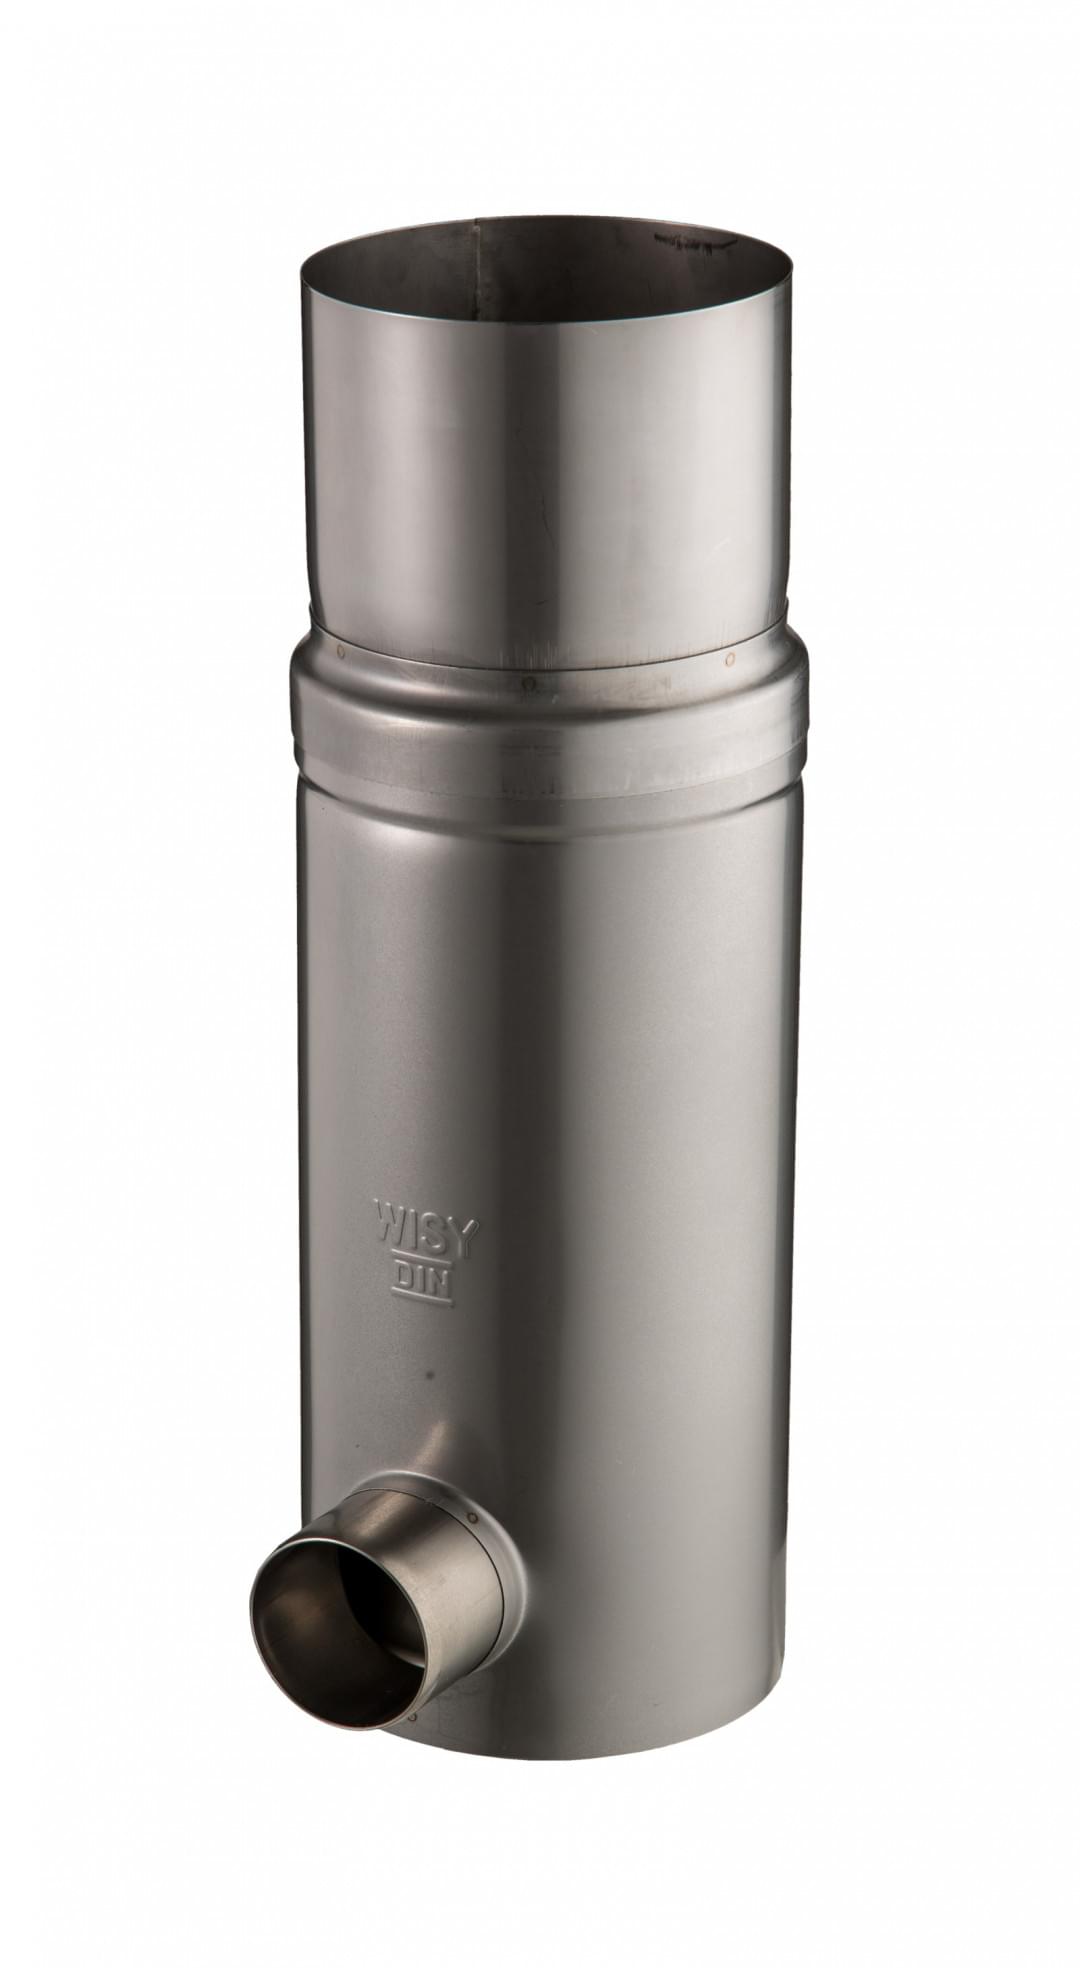 FS First Flush Rainwater Filter Collector from Bacfree